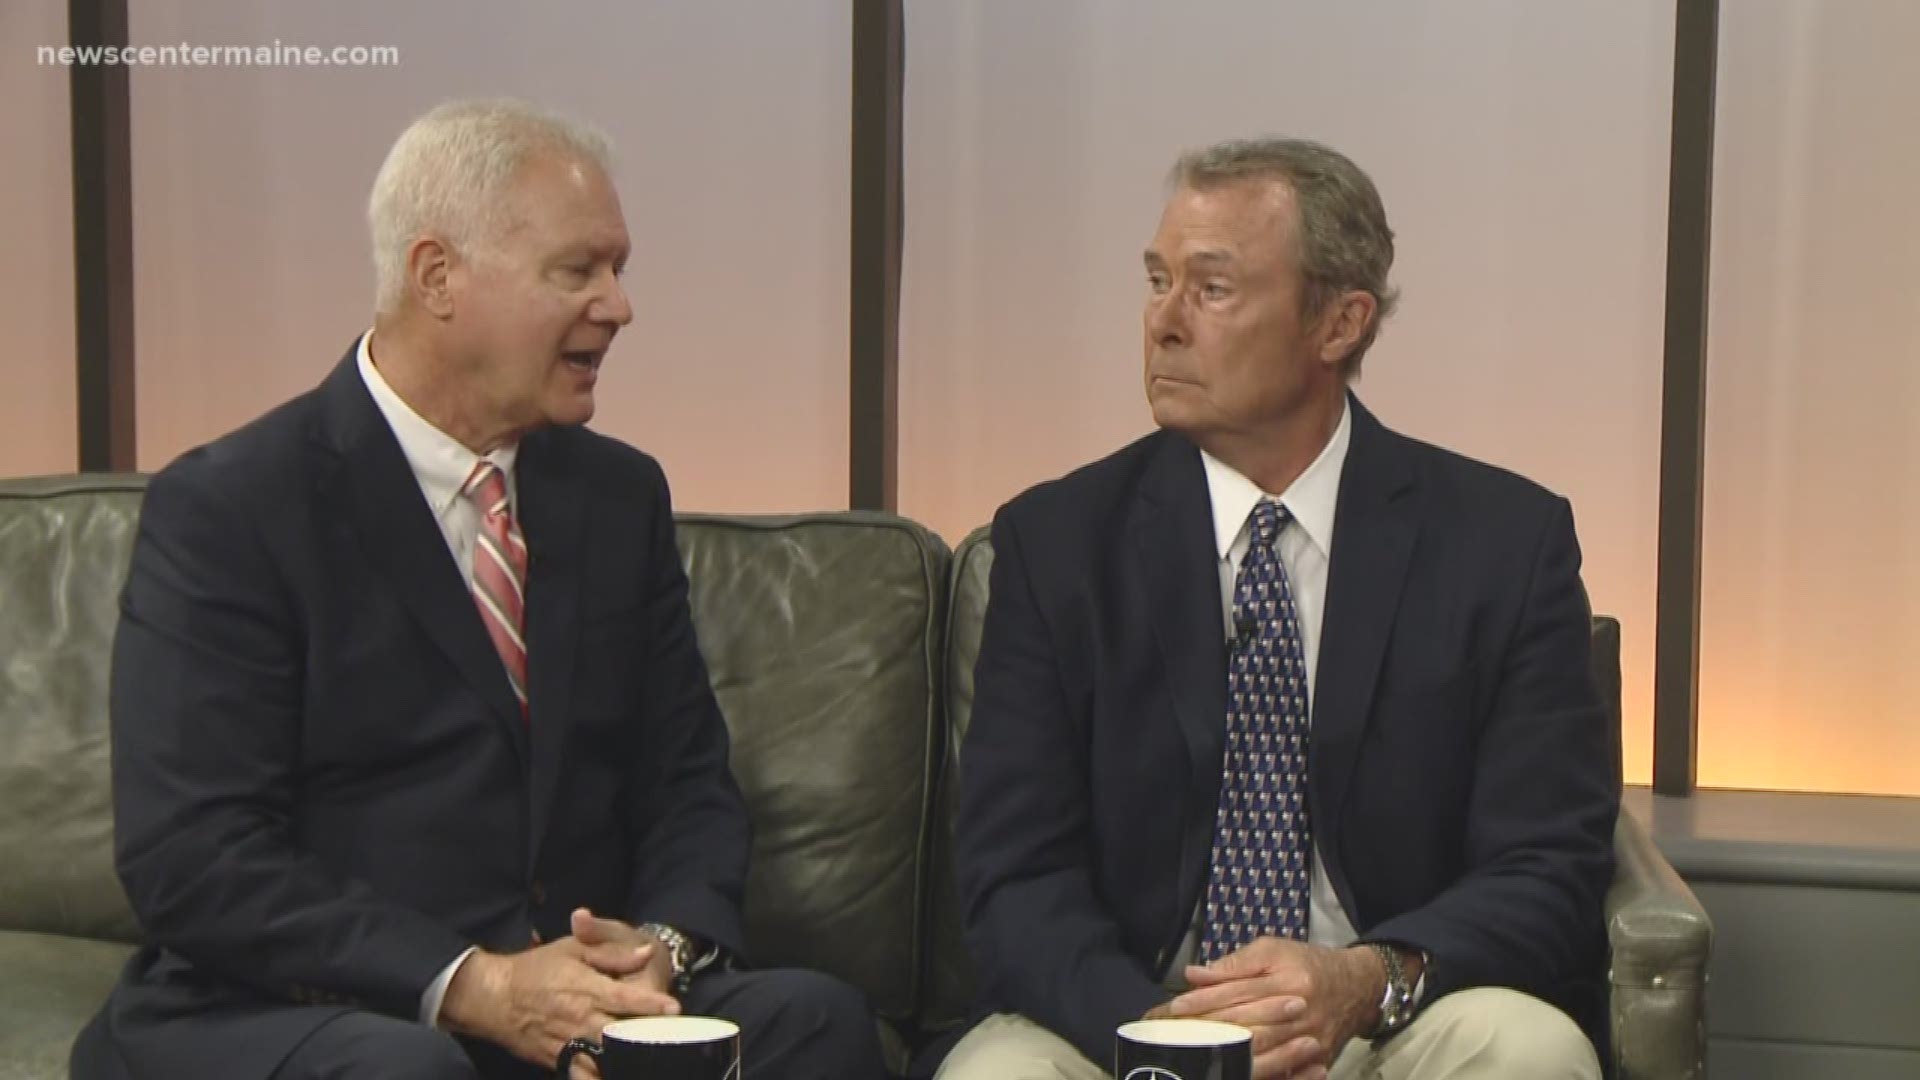 Pat Callaghan and NEWS CENTER's political analysts discuss this week in politics.